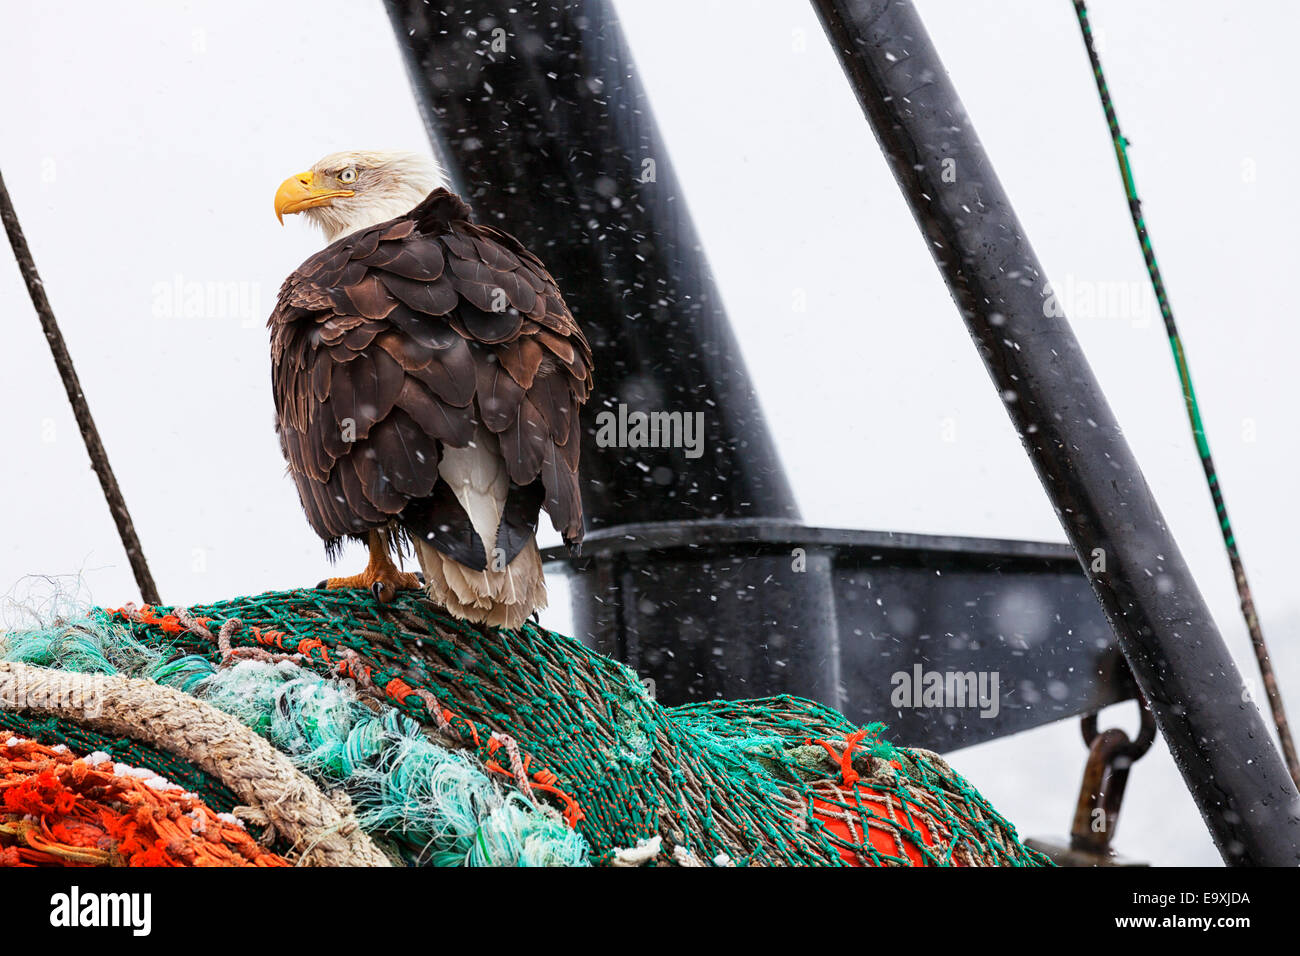 Bald eagle perched on fishing net in search of scraps during snow